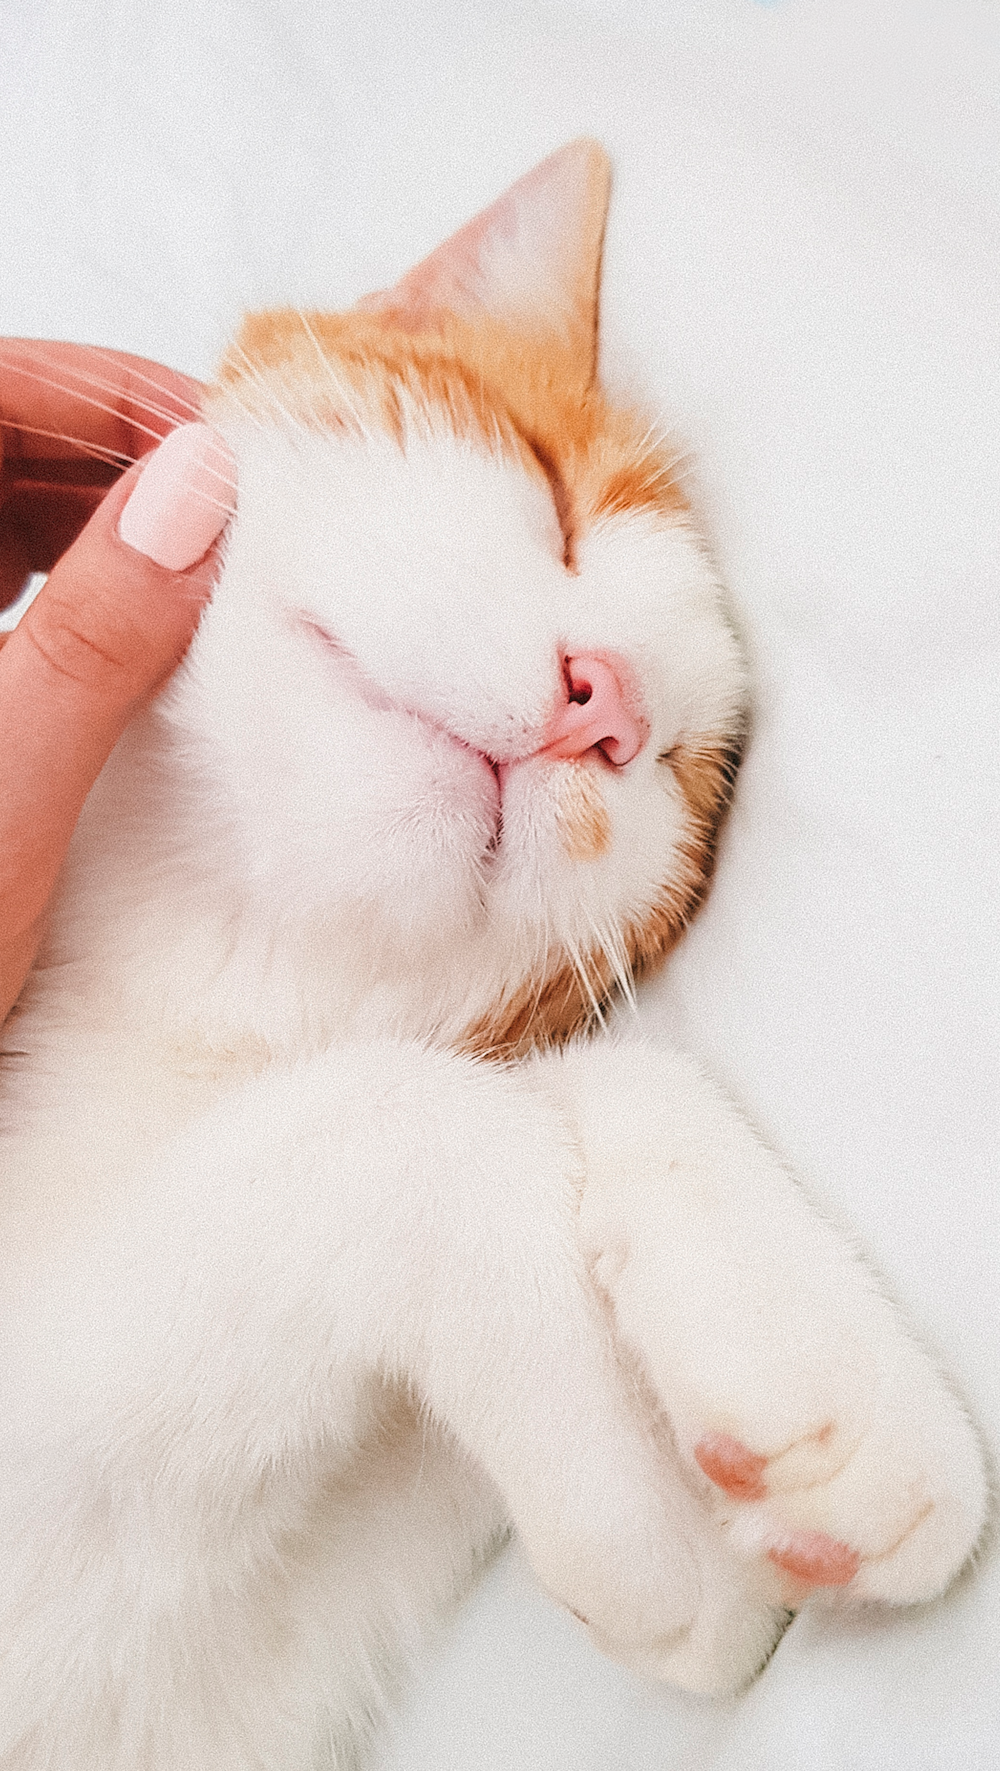 person holding white and orange cat lying on white textile